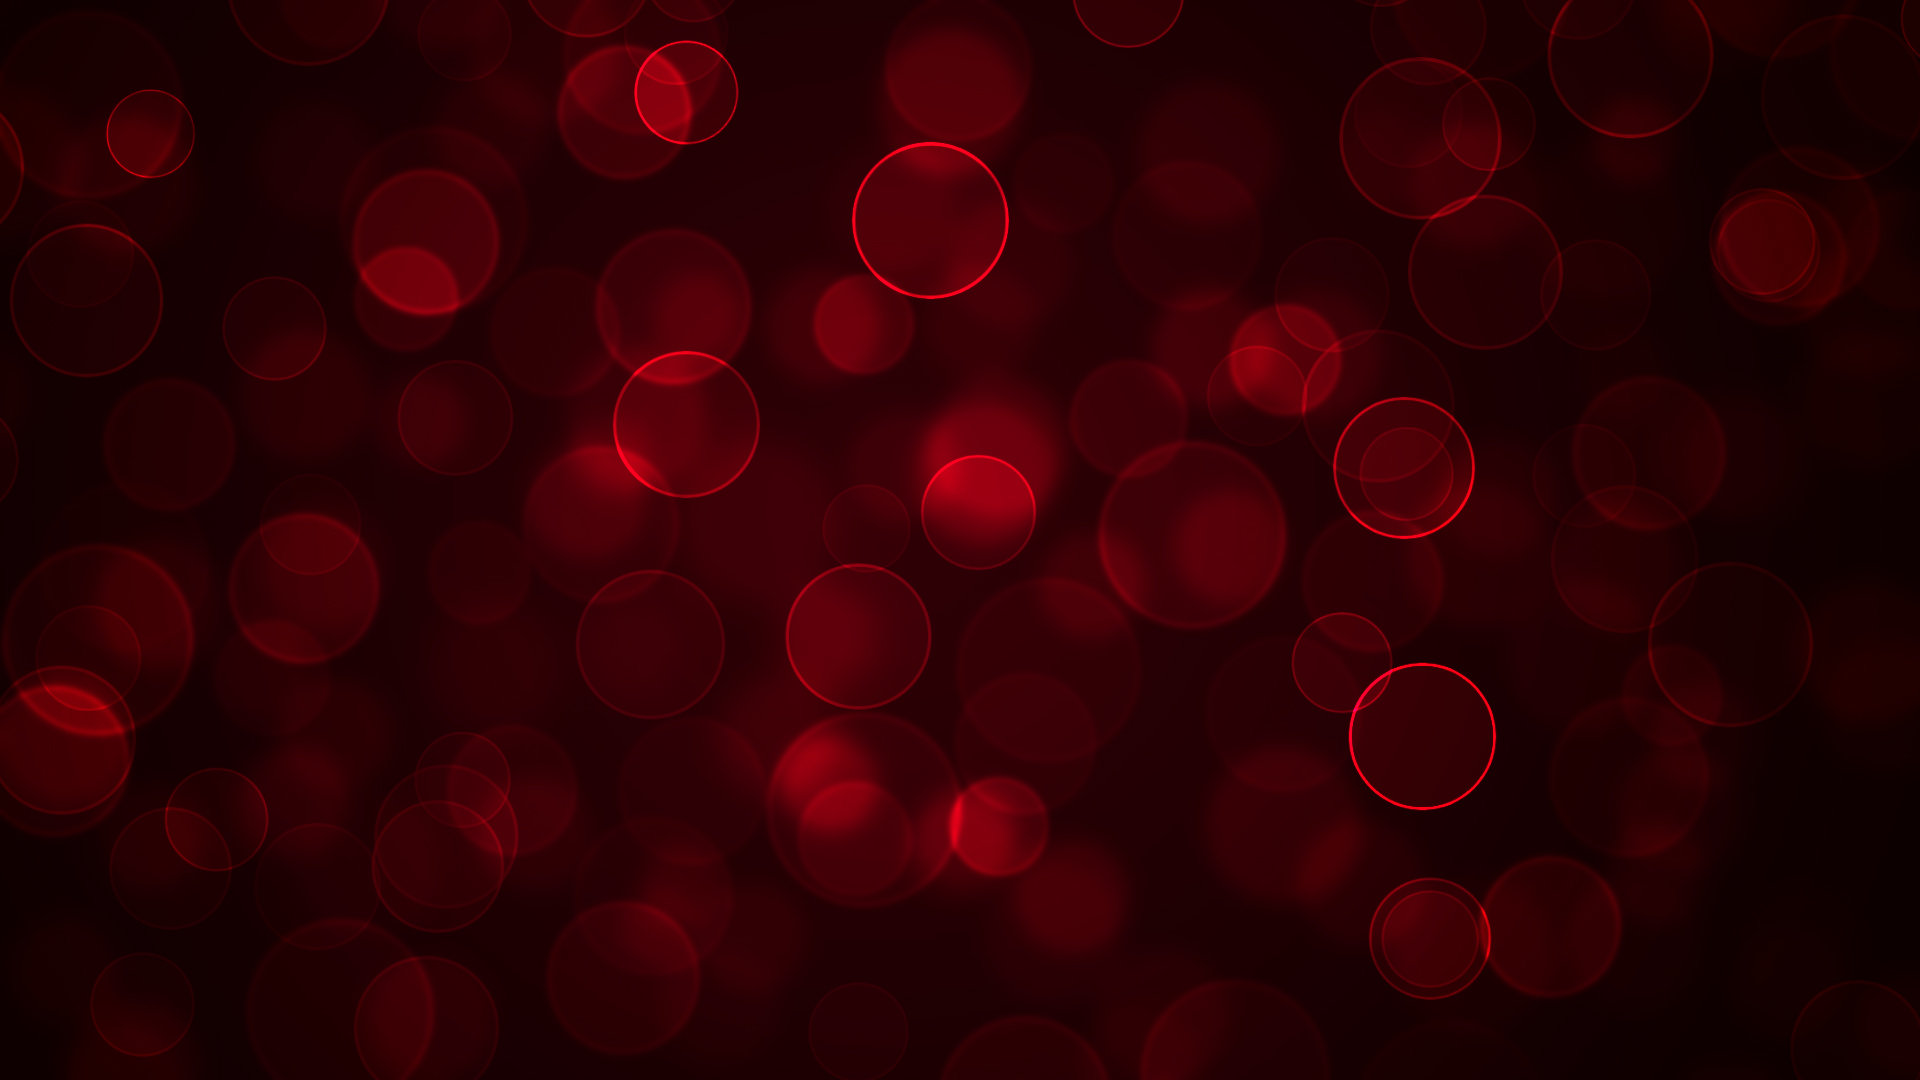 Red Wallpapers Hd For Desktop Backgrounds